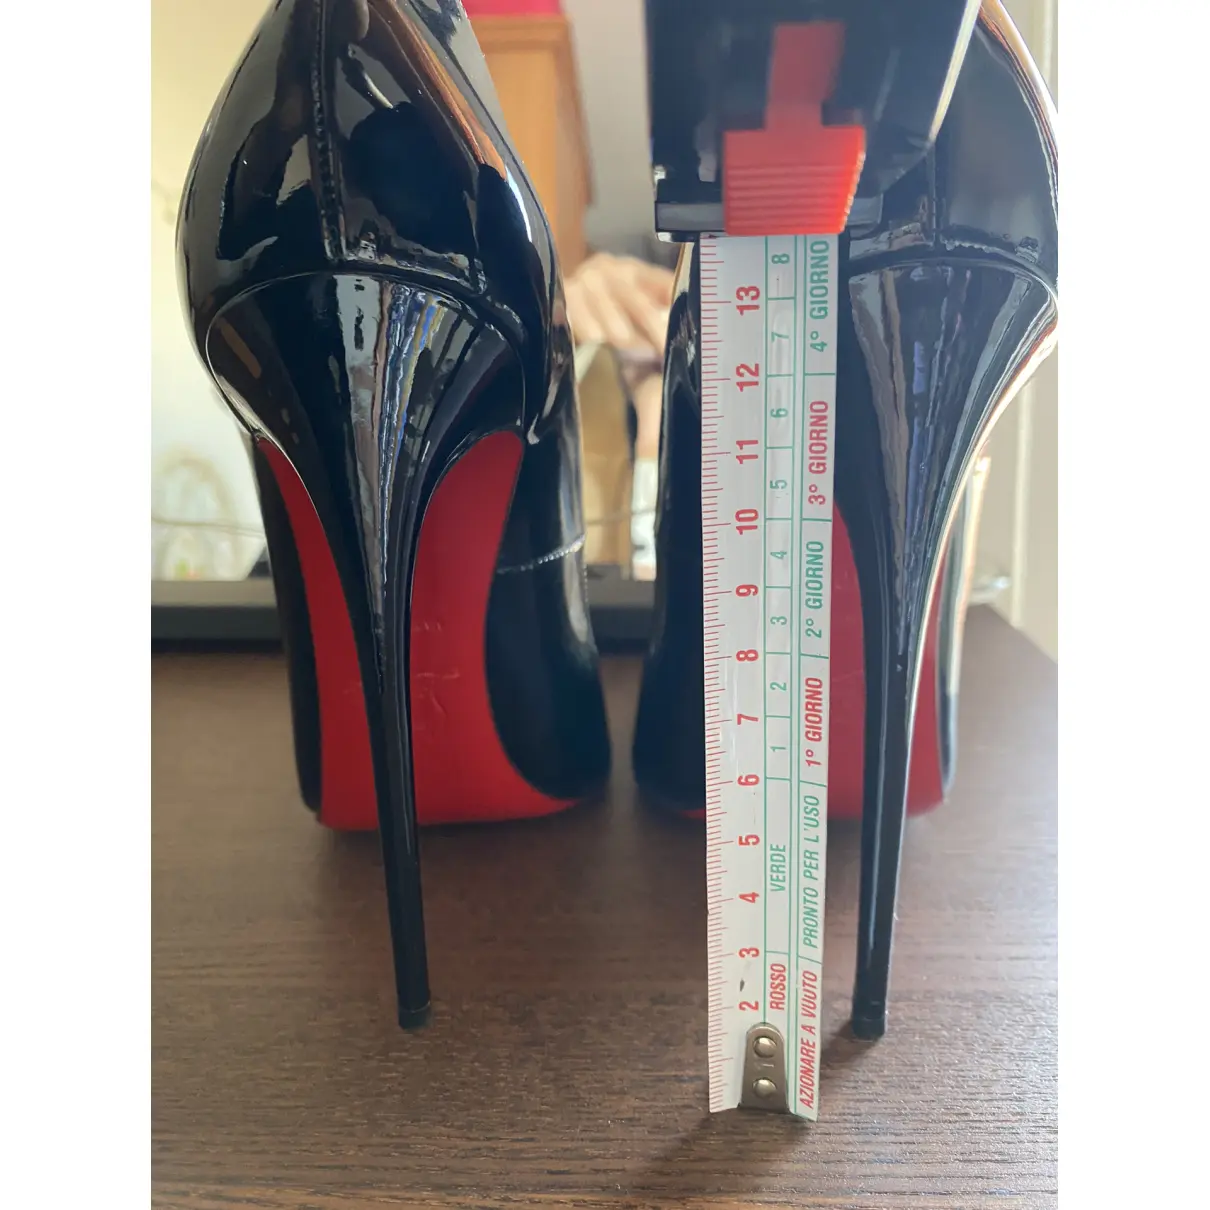 Hot Chick patent leather heels Christian Louboutin